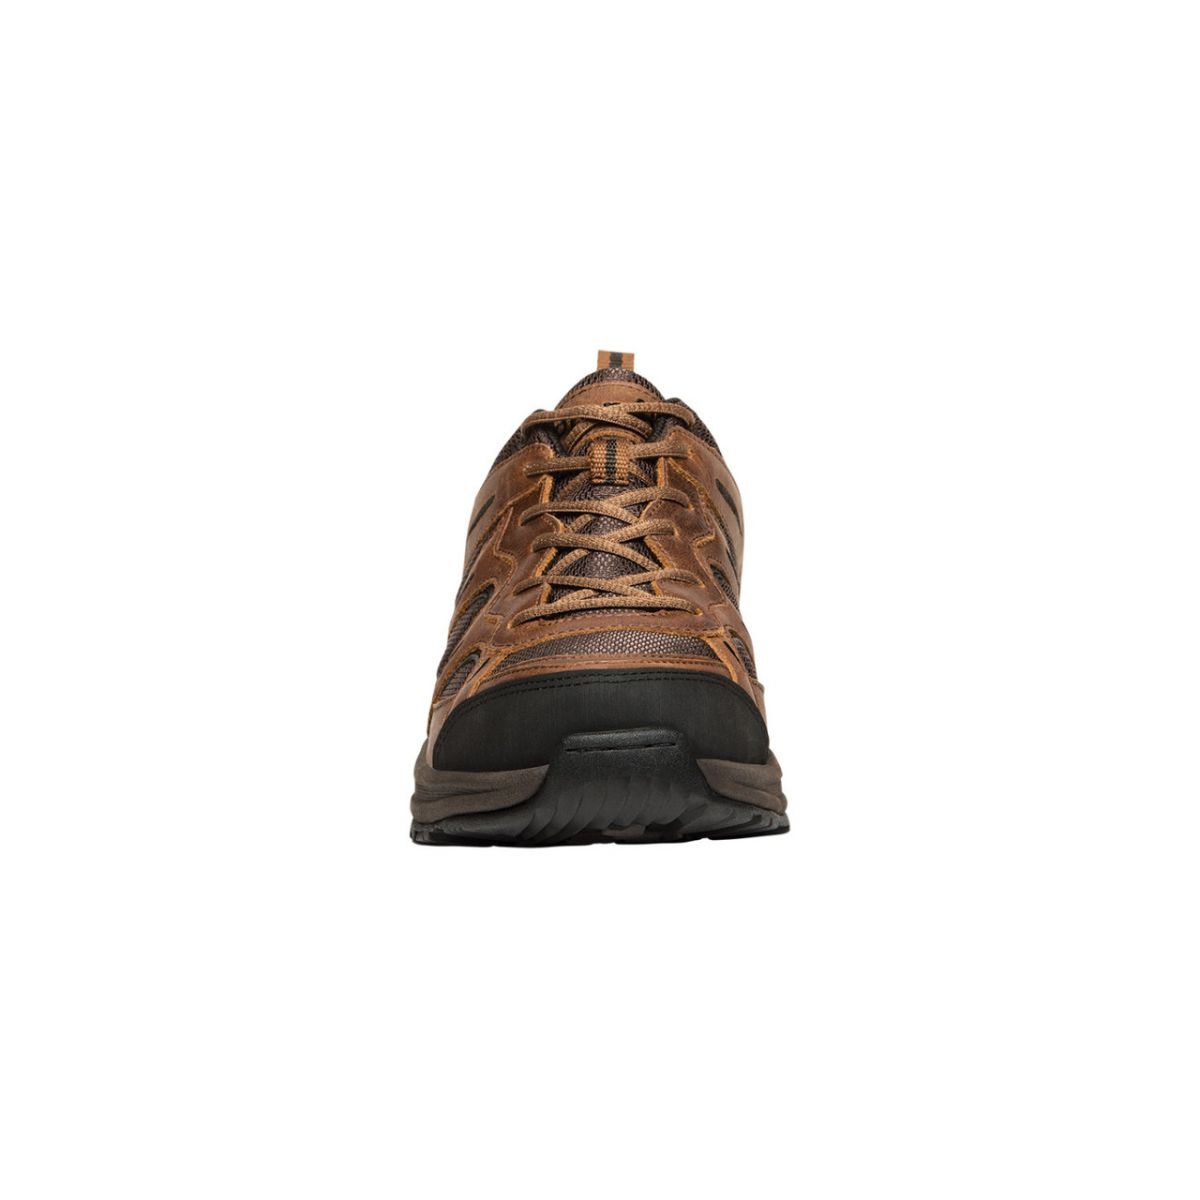 Propet Men's Connelly Hiking Shoe Brown - M5503BR BROWN - BROWN, 9.5-E